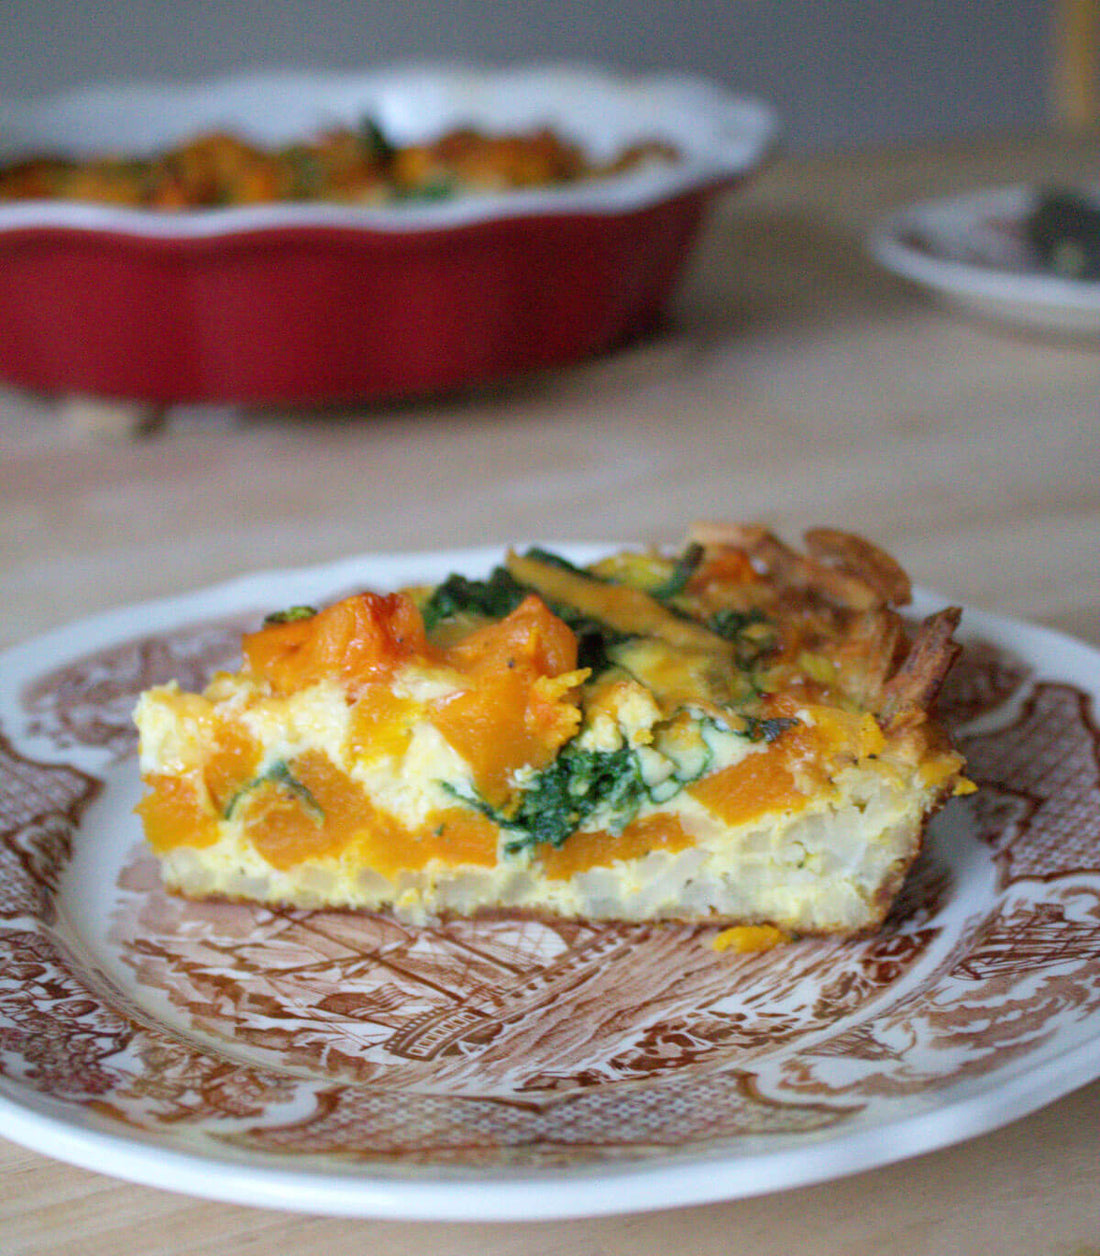 Savory Squash Quiche with Spinach and Gruyere